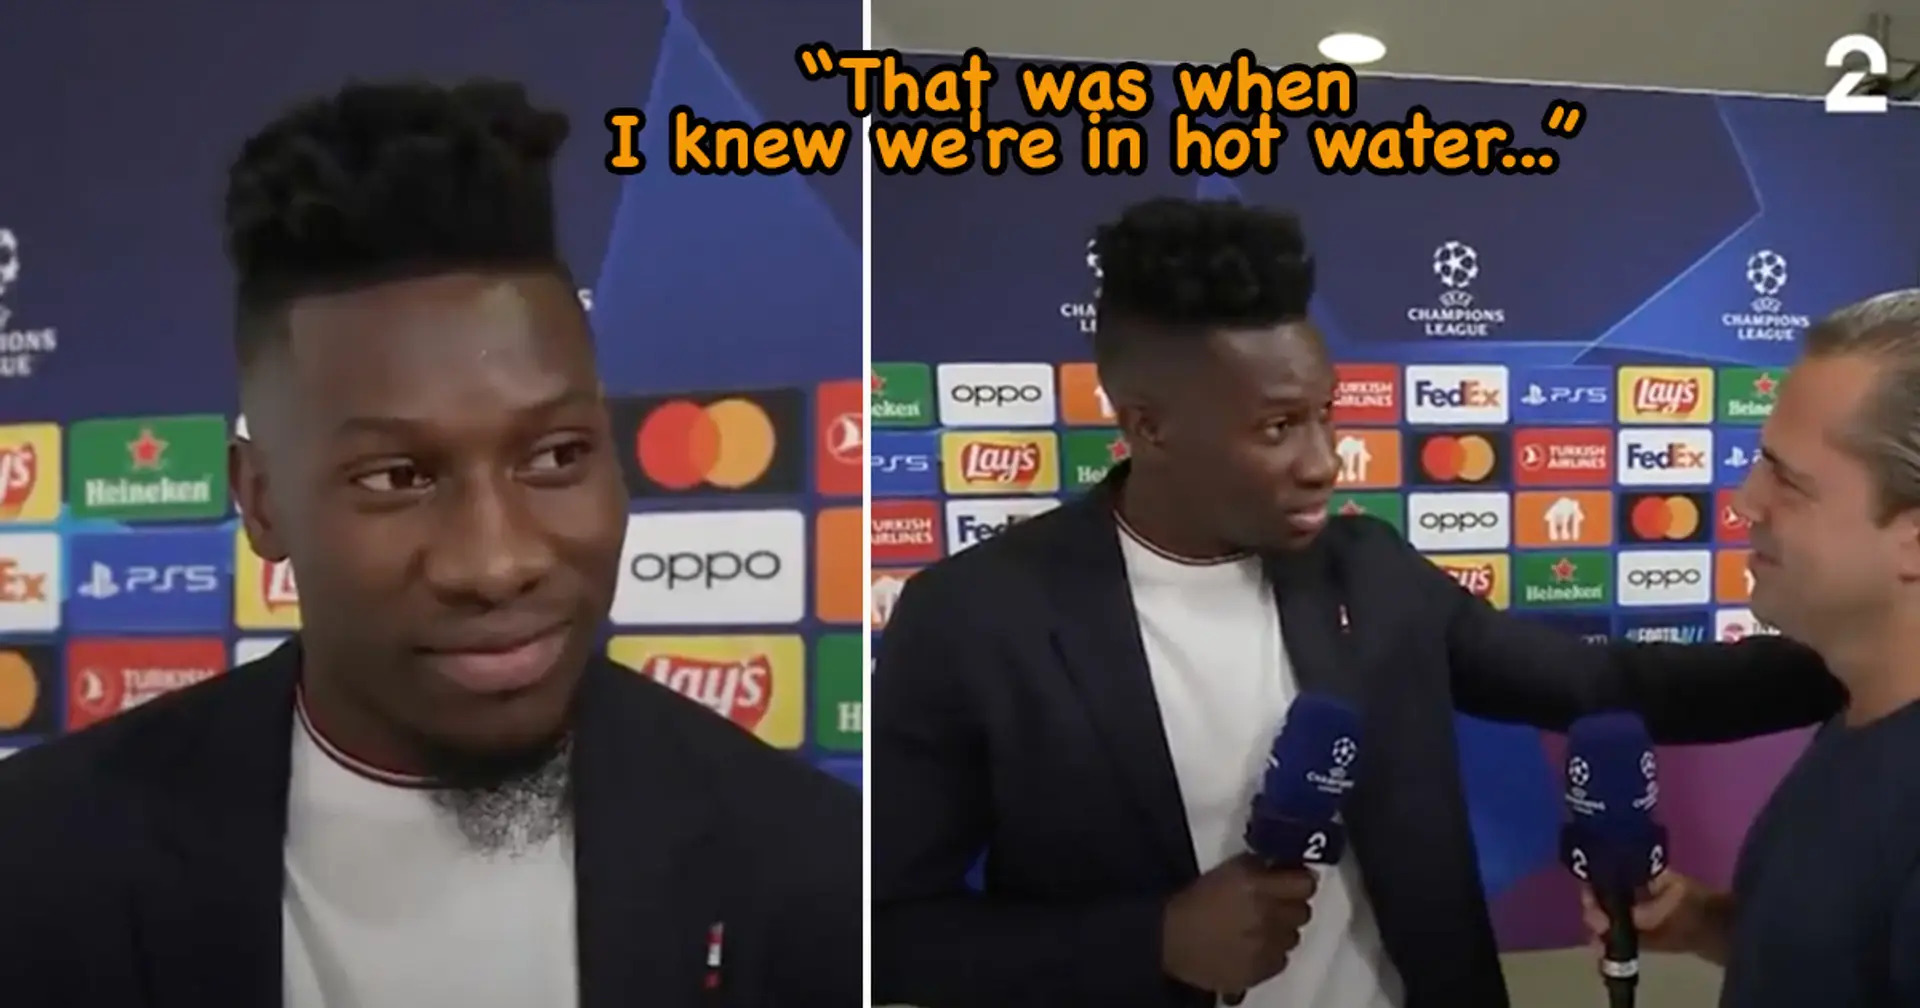 'Textbook West African uncle move': Fans say Man United lost because of what Onana did BEFORE game